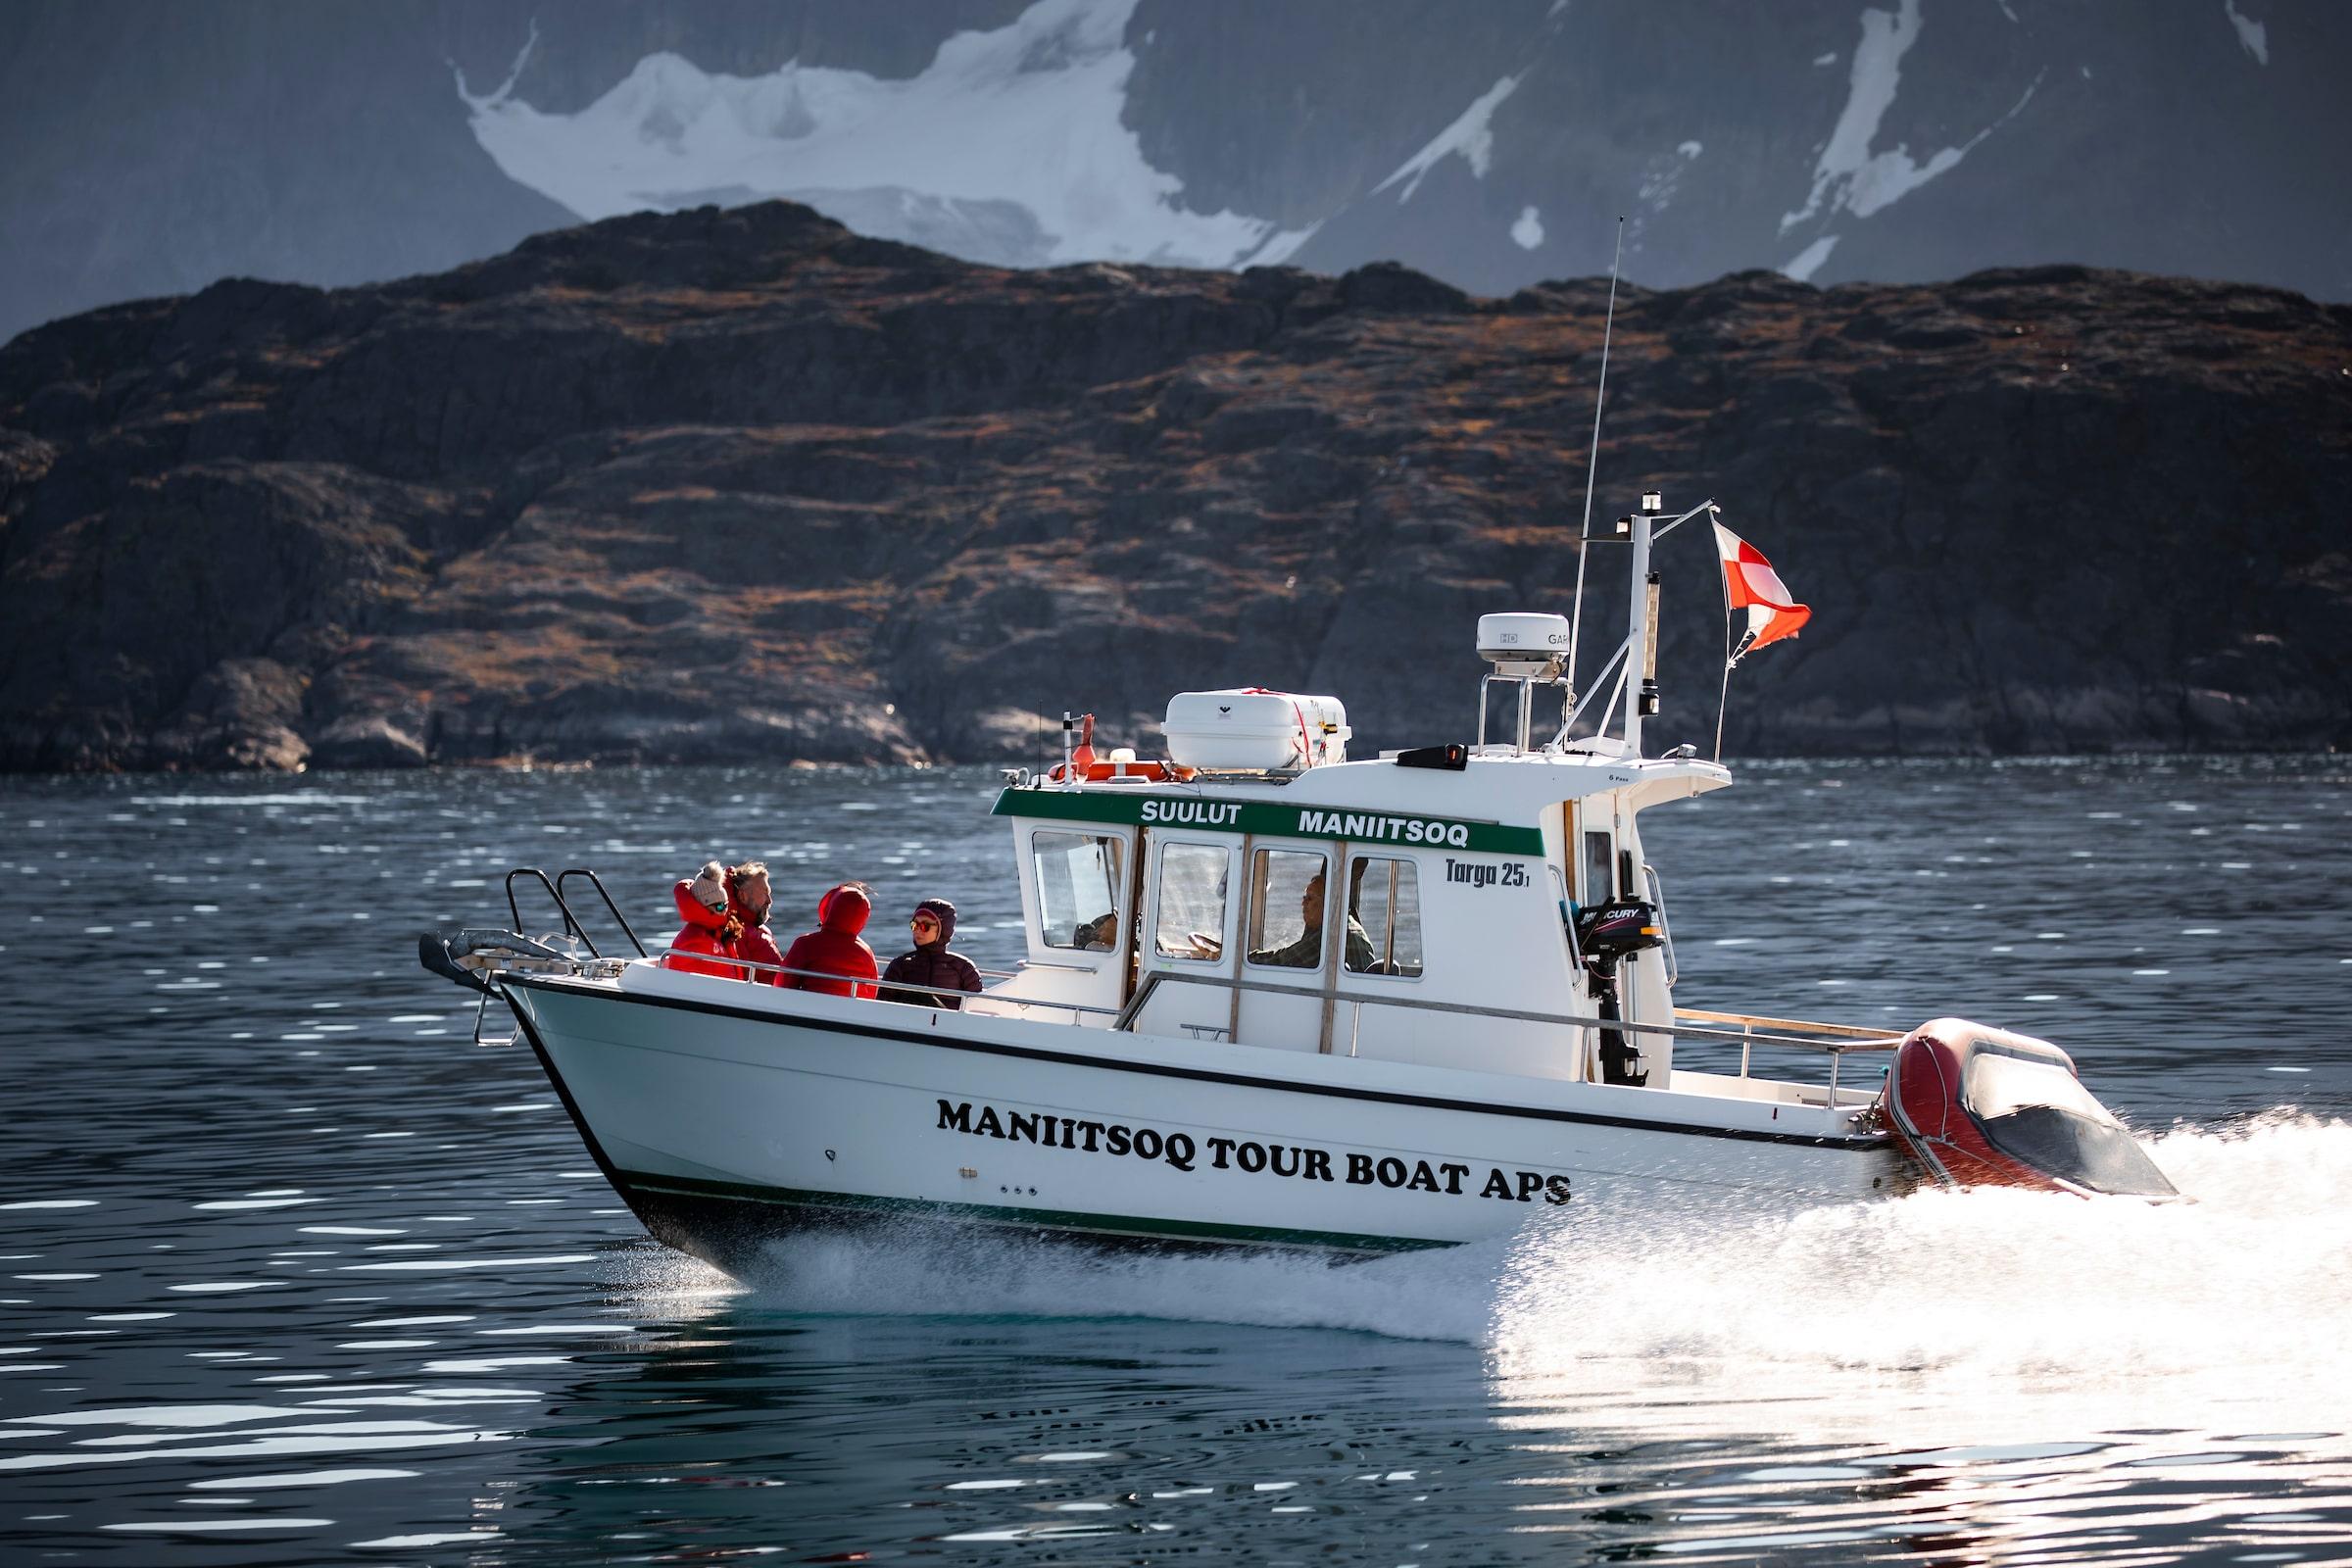 Maniitsoq tour boat sailing in to Eternity Fjord. Photo by Aningaaq Rosing Carlsen